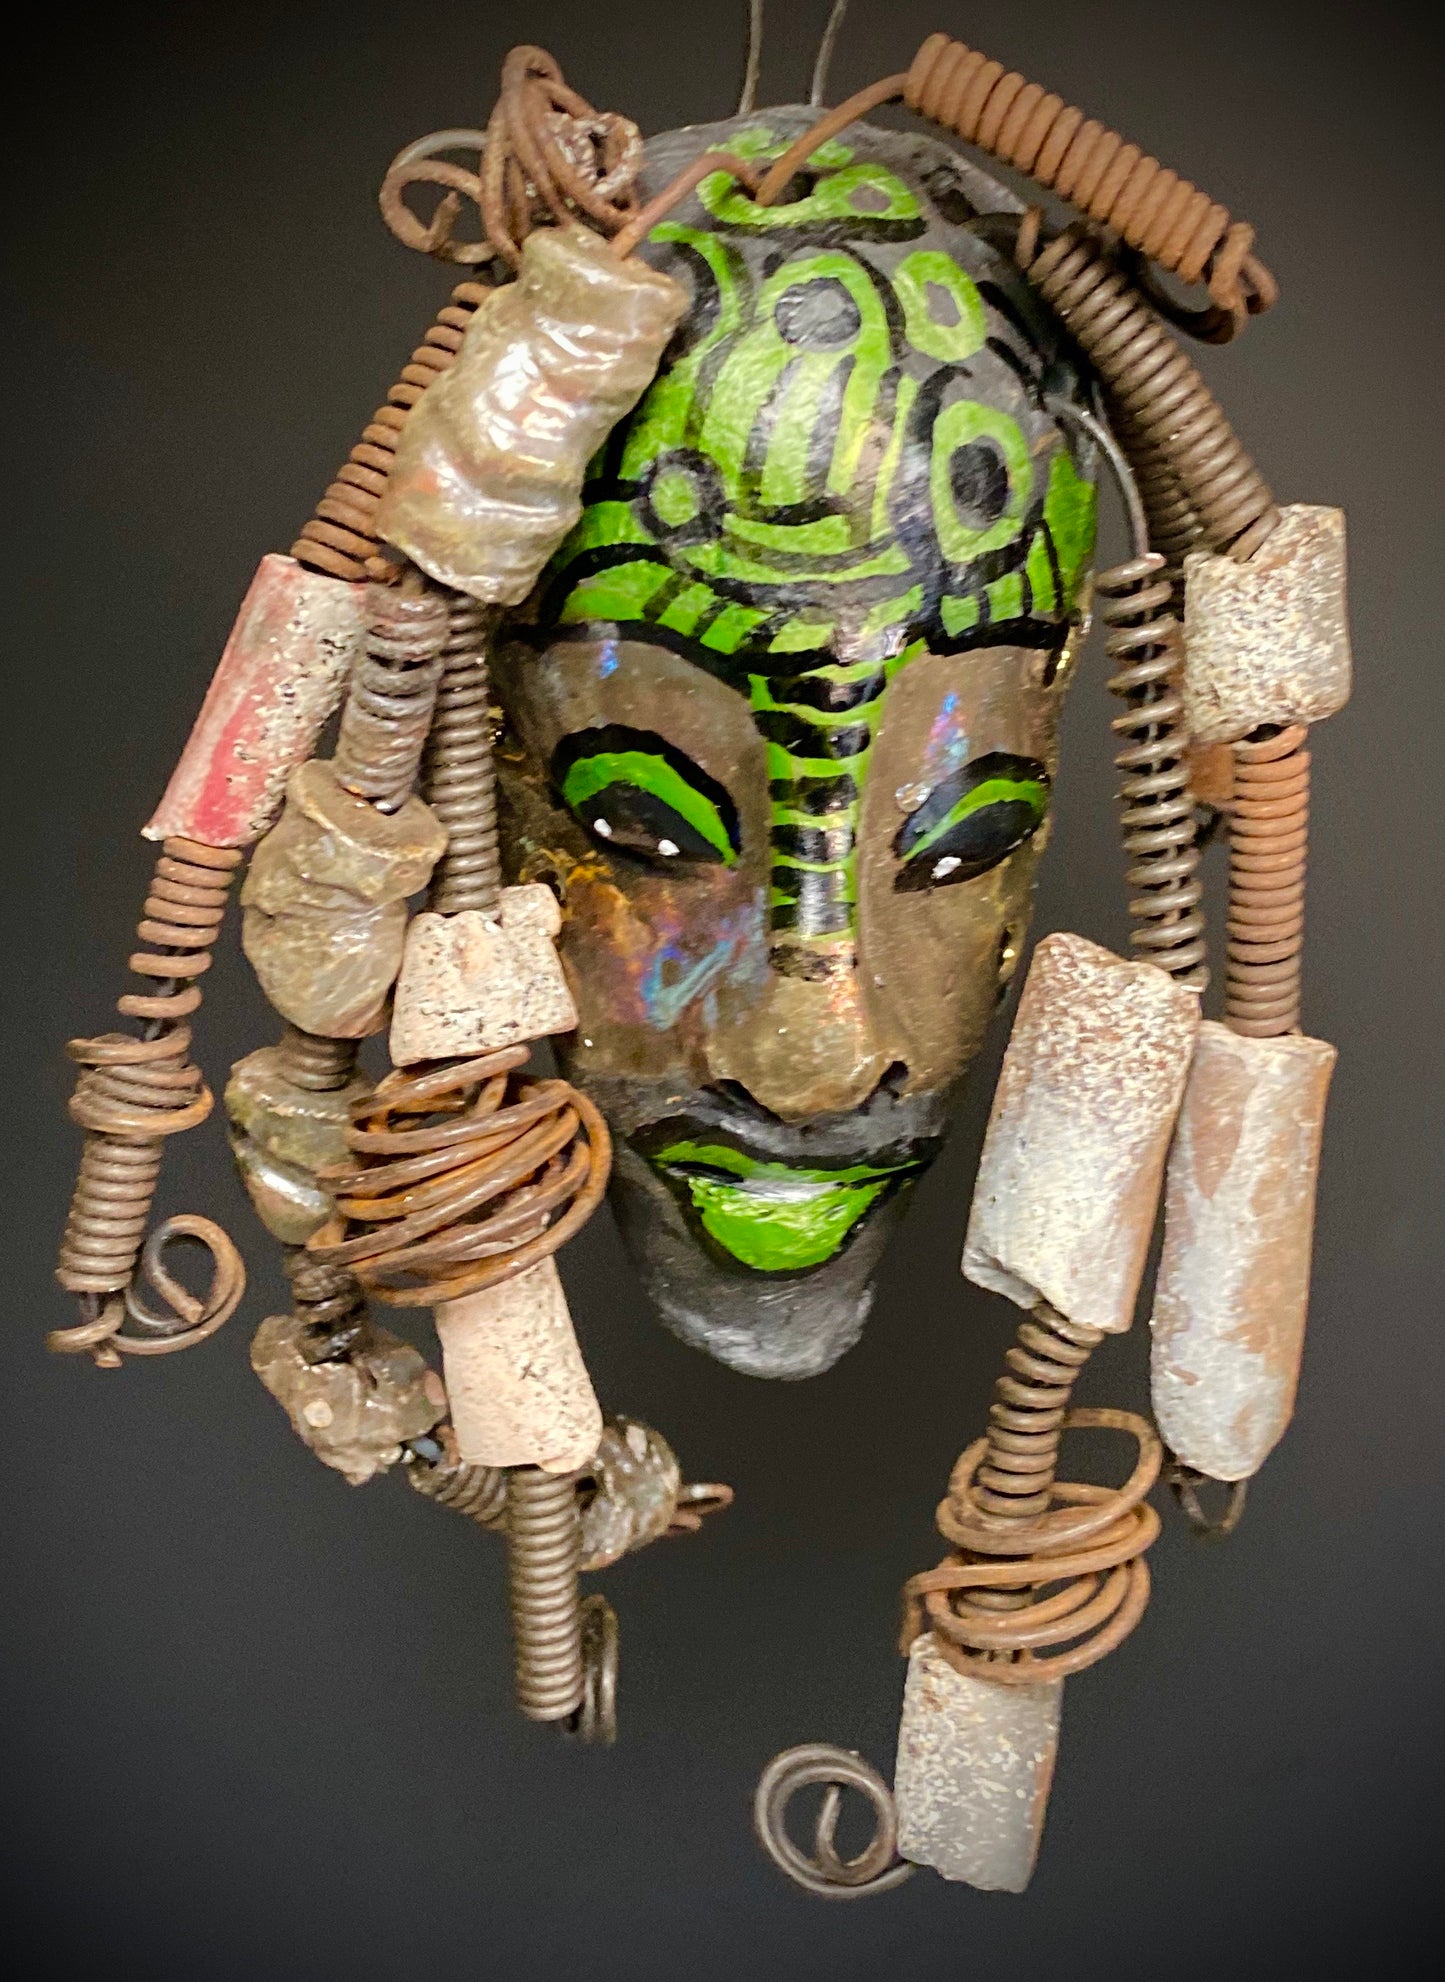 I started making art soon after seeing authentic African artwork at the Smithsonian Museum of African Art. I was in total awe. This work was inspired by my visit there.  Meet the Green Man! The Green Man is   5"x 6". He has green and black horizontal stripes with bright eyes and green lips. He has hand coiled 16 gauge wire  hair with over  10 raku beads.